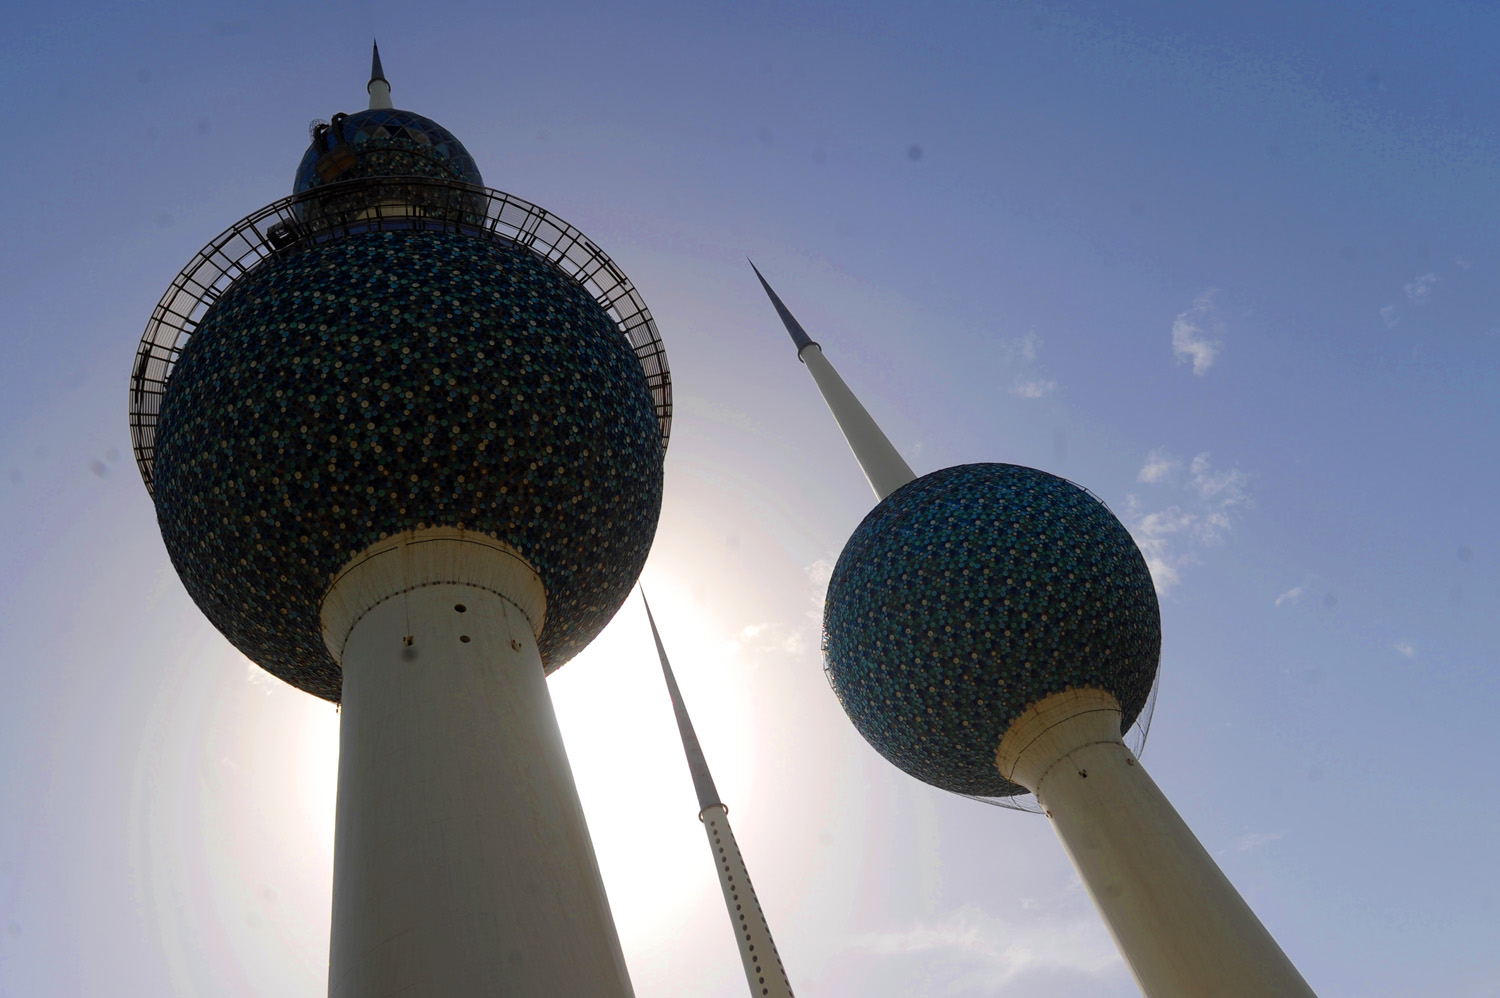 Kuwait Towers re-opened after 5 years of renovations